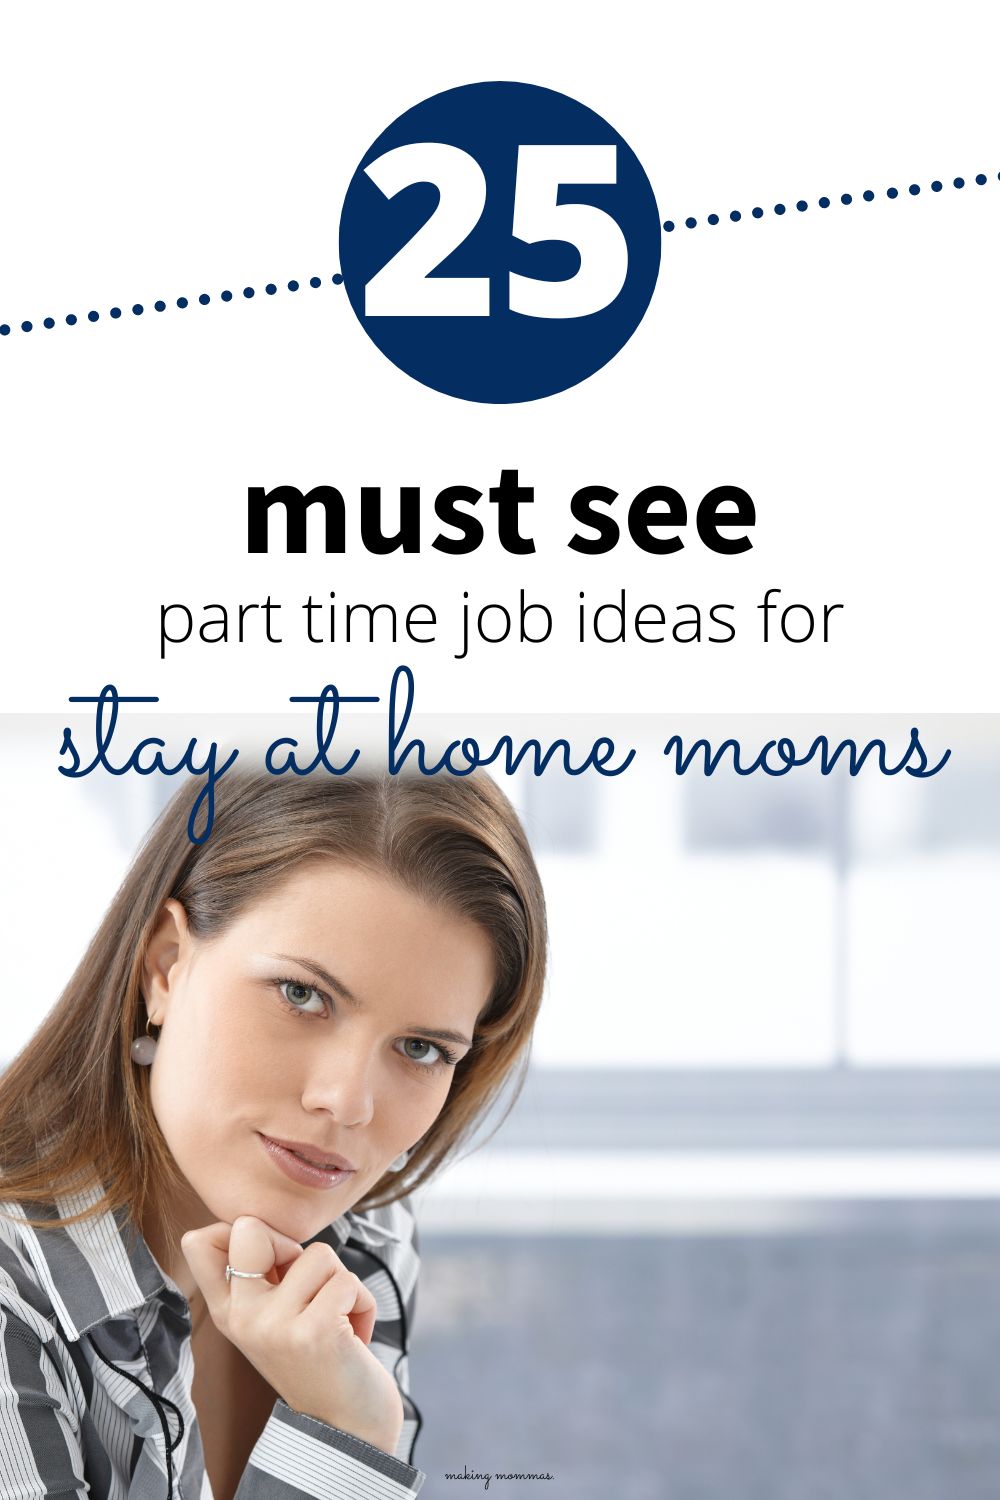 pin image of 25 must see part time job ideas for stay at home moms